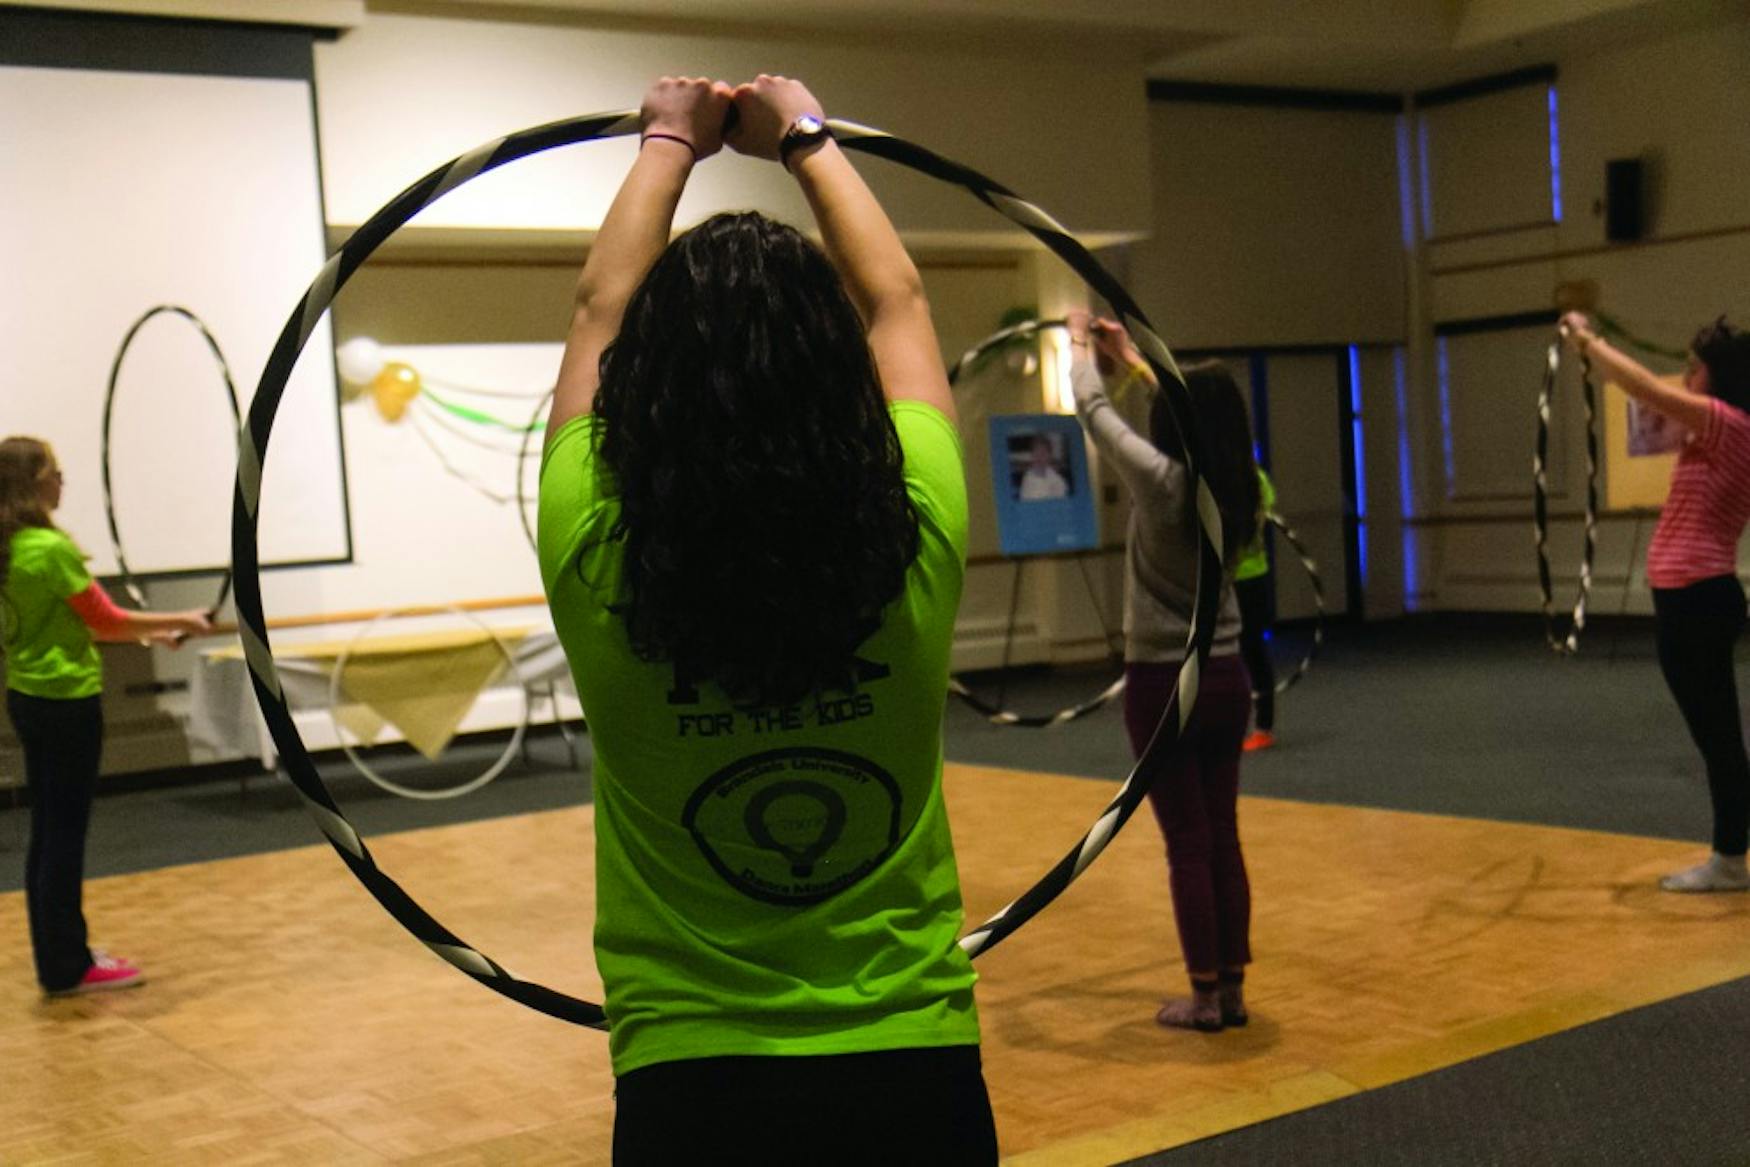 TWIST AND SHOUT: During the marathon, Samantha Rokey ’17 led a hula hooping demonstration and dance class.